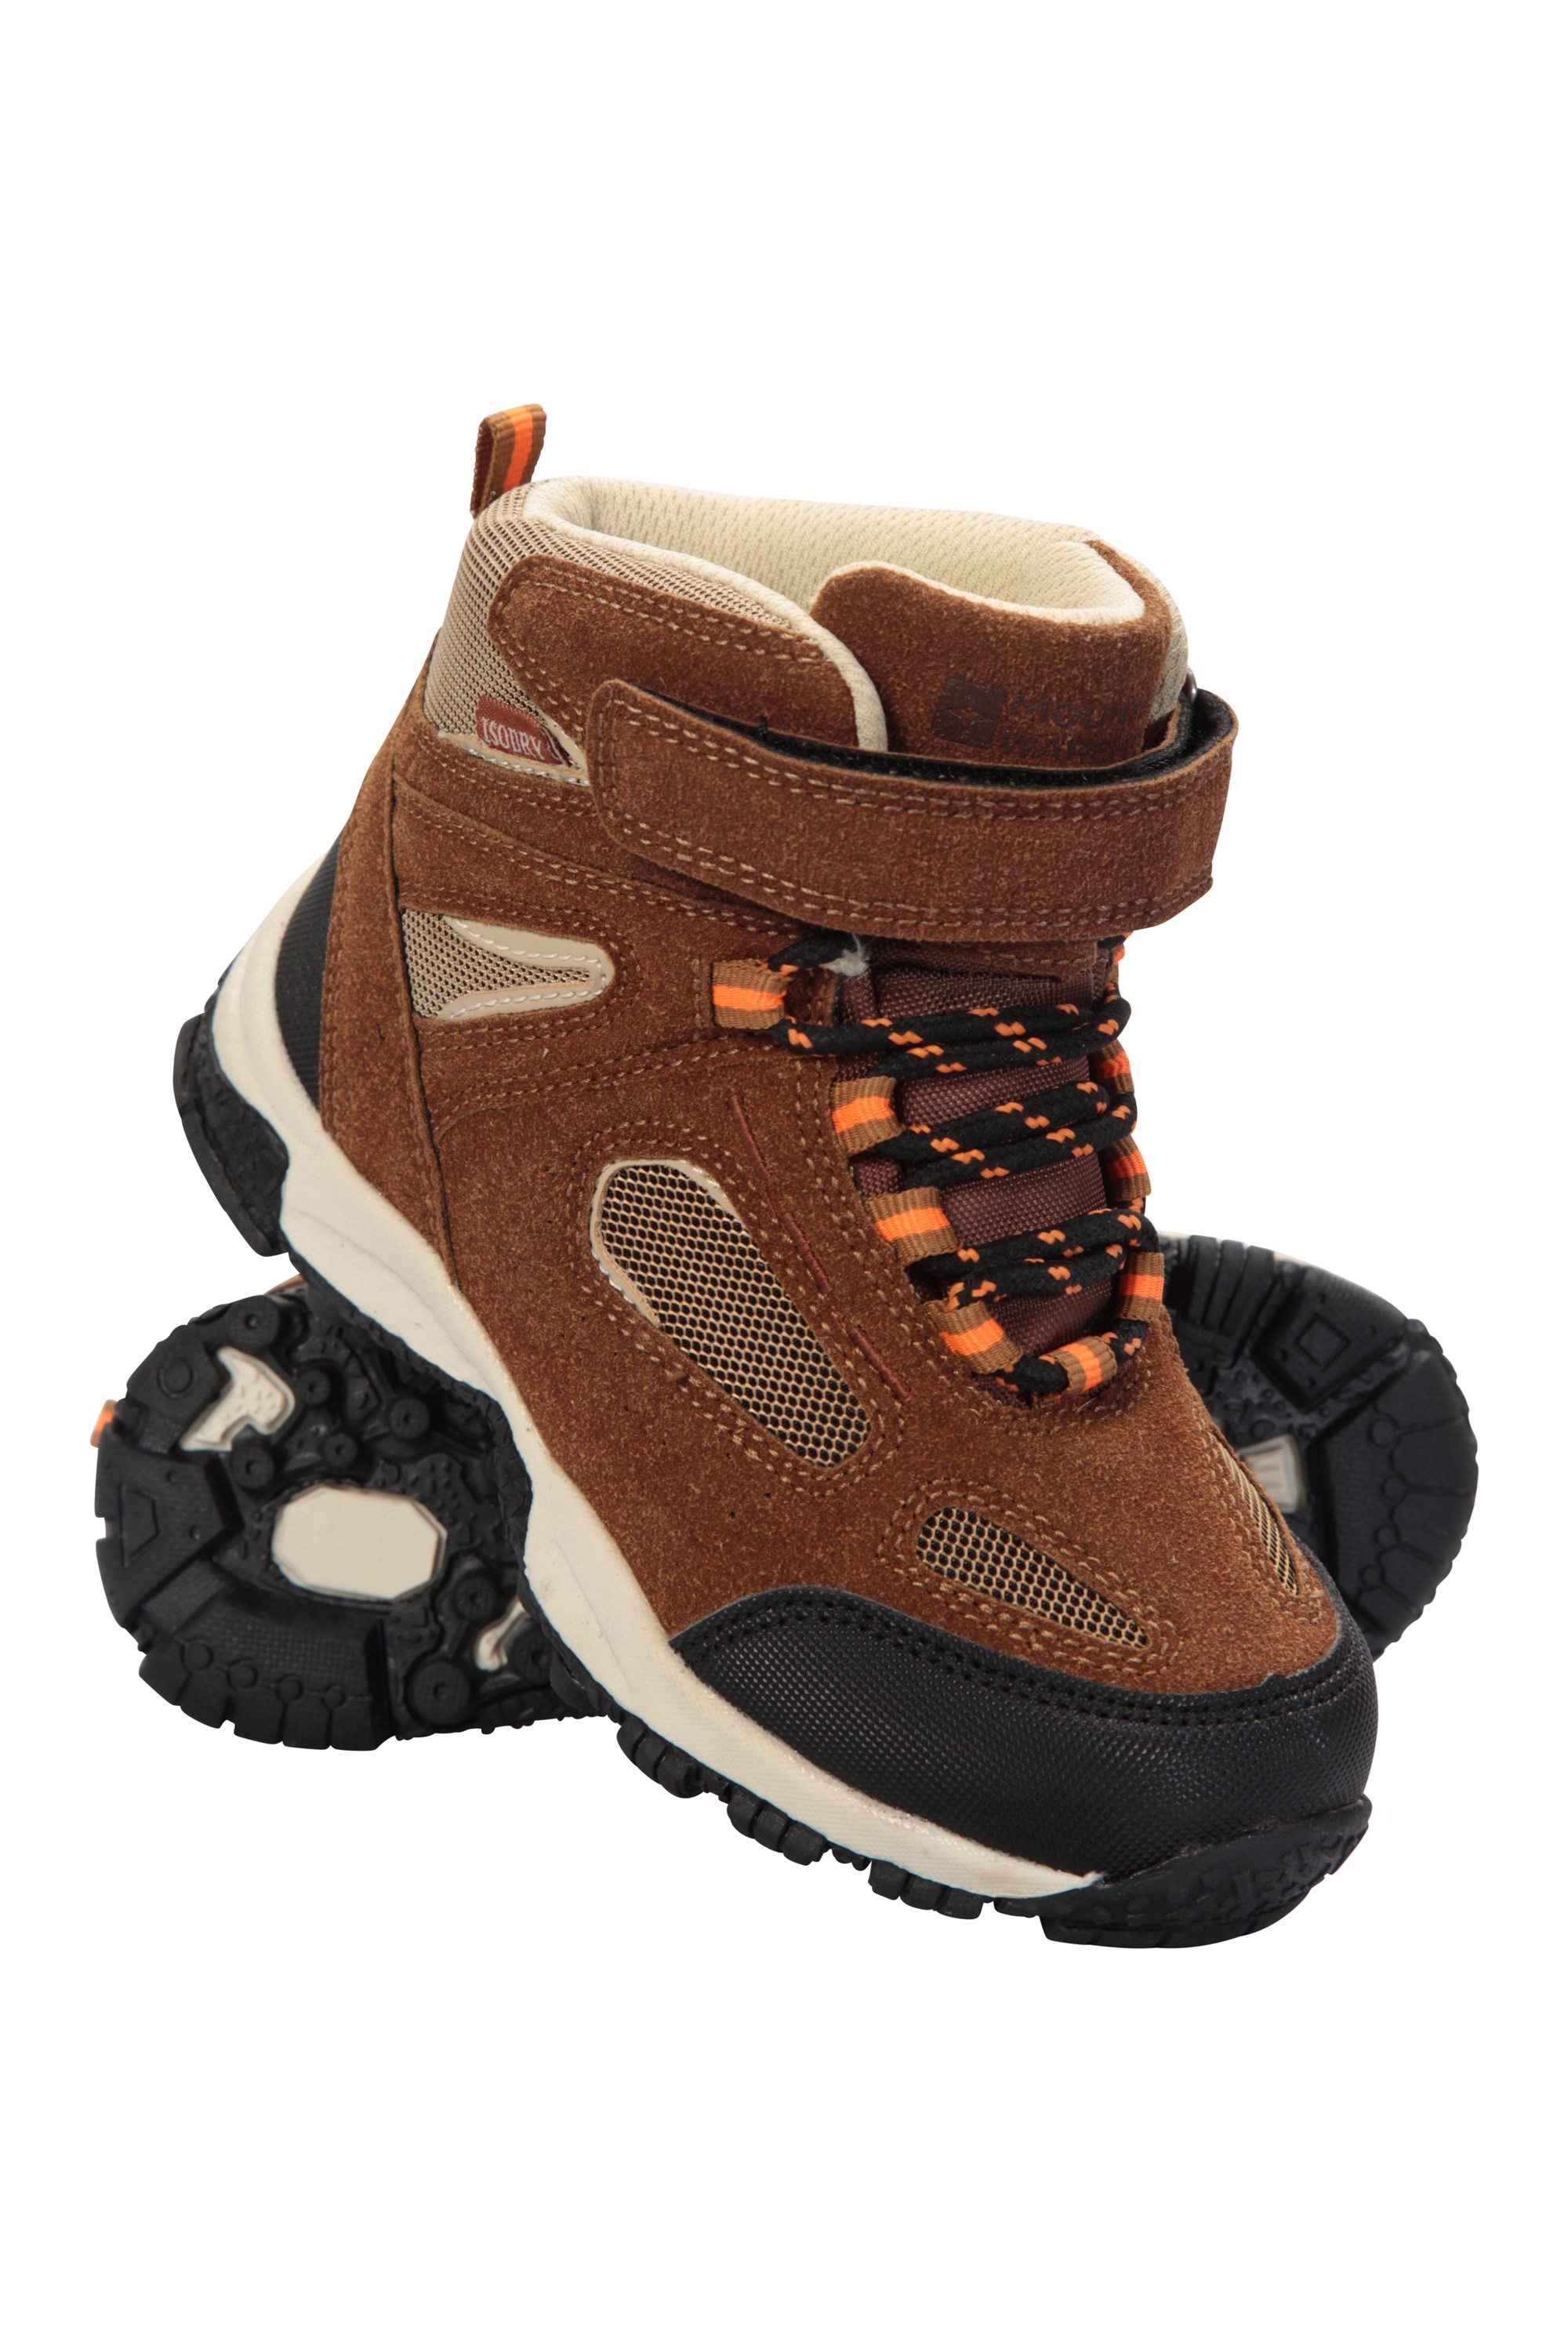 Mountain Warehouse Forest Junior Waterproof Boots Brown